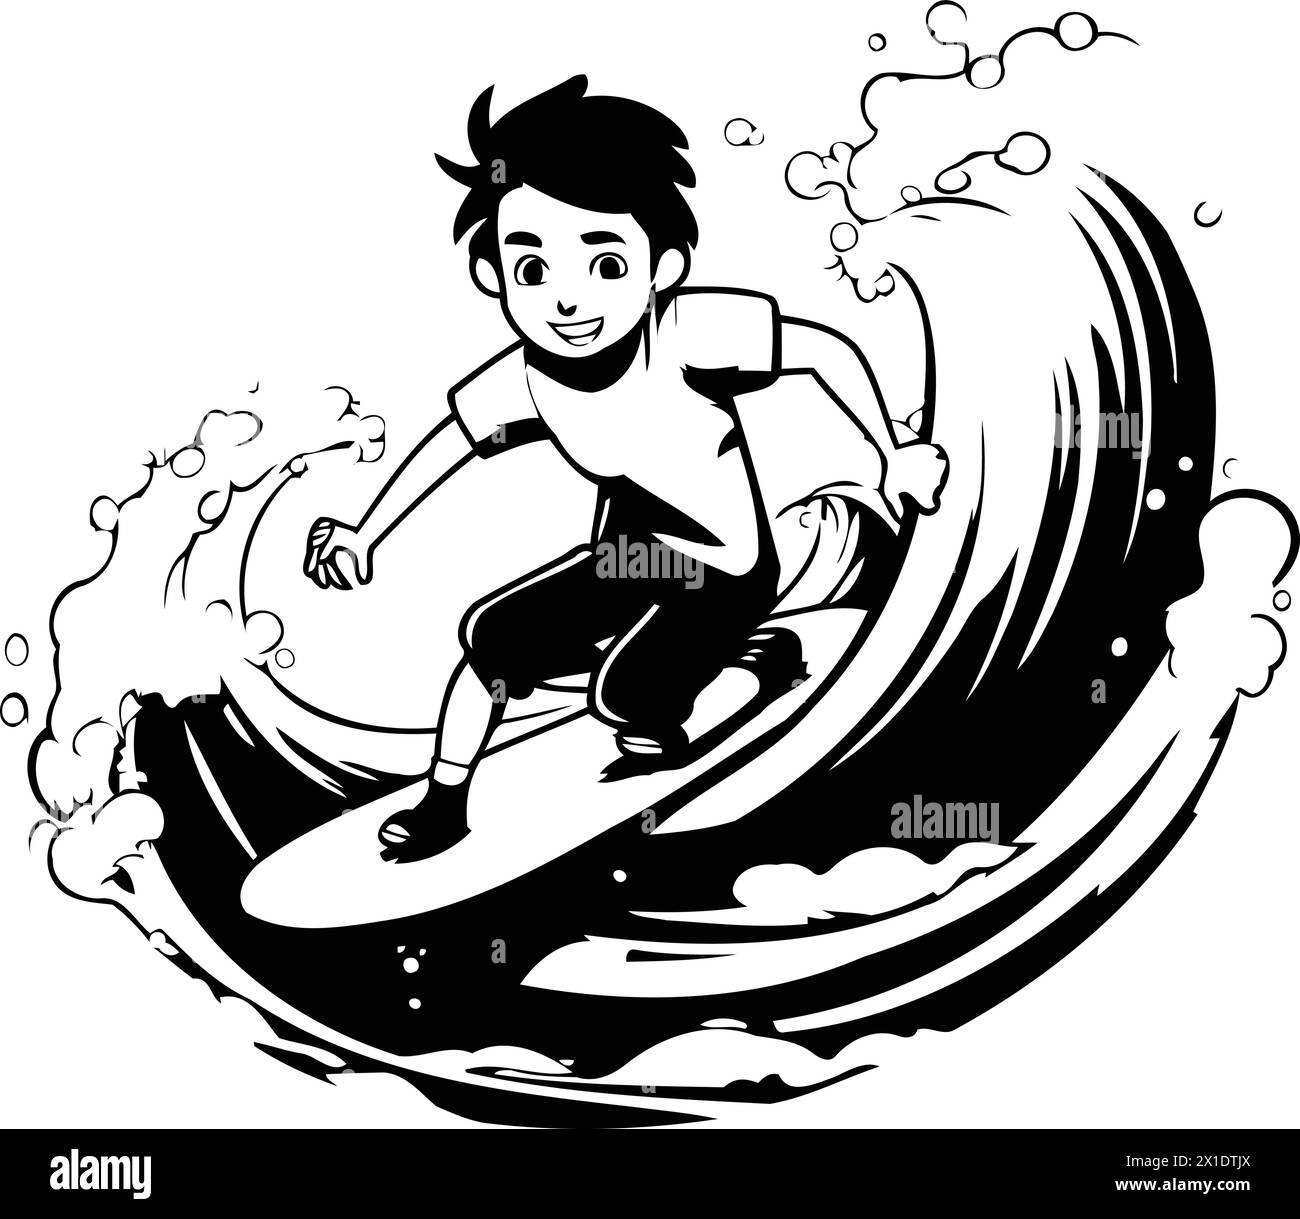 Surfer boy surfing in the waves. Vector illustration isolated on white background. Stock Vector